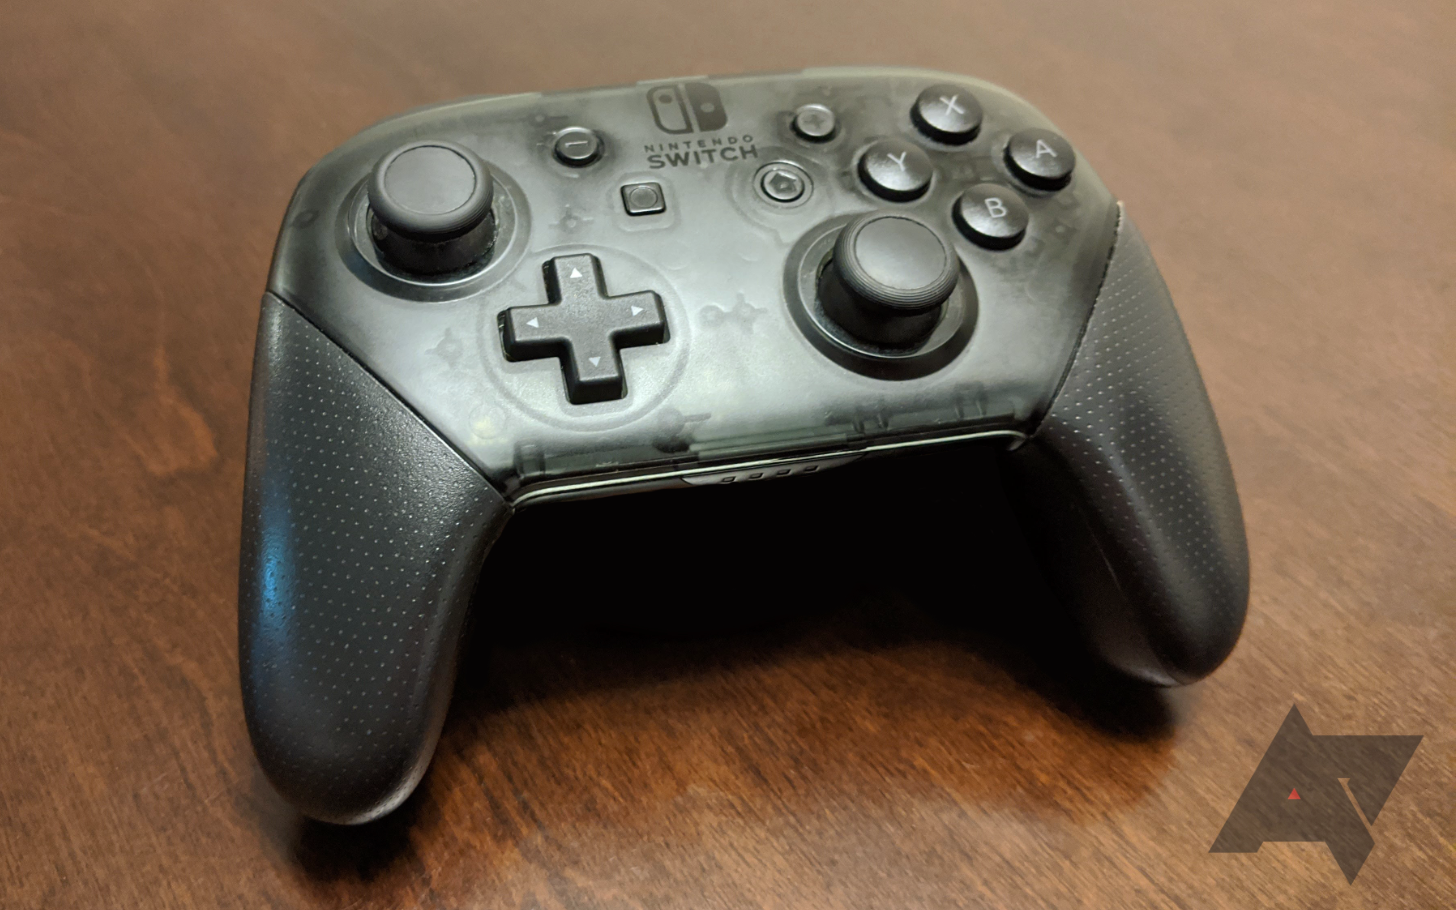 How To Use A Nintendo Switch Pro Controller On An Android Phone Or Tablet